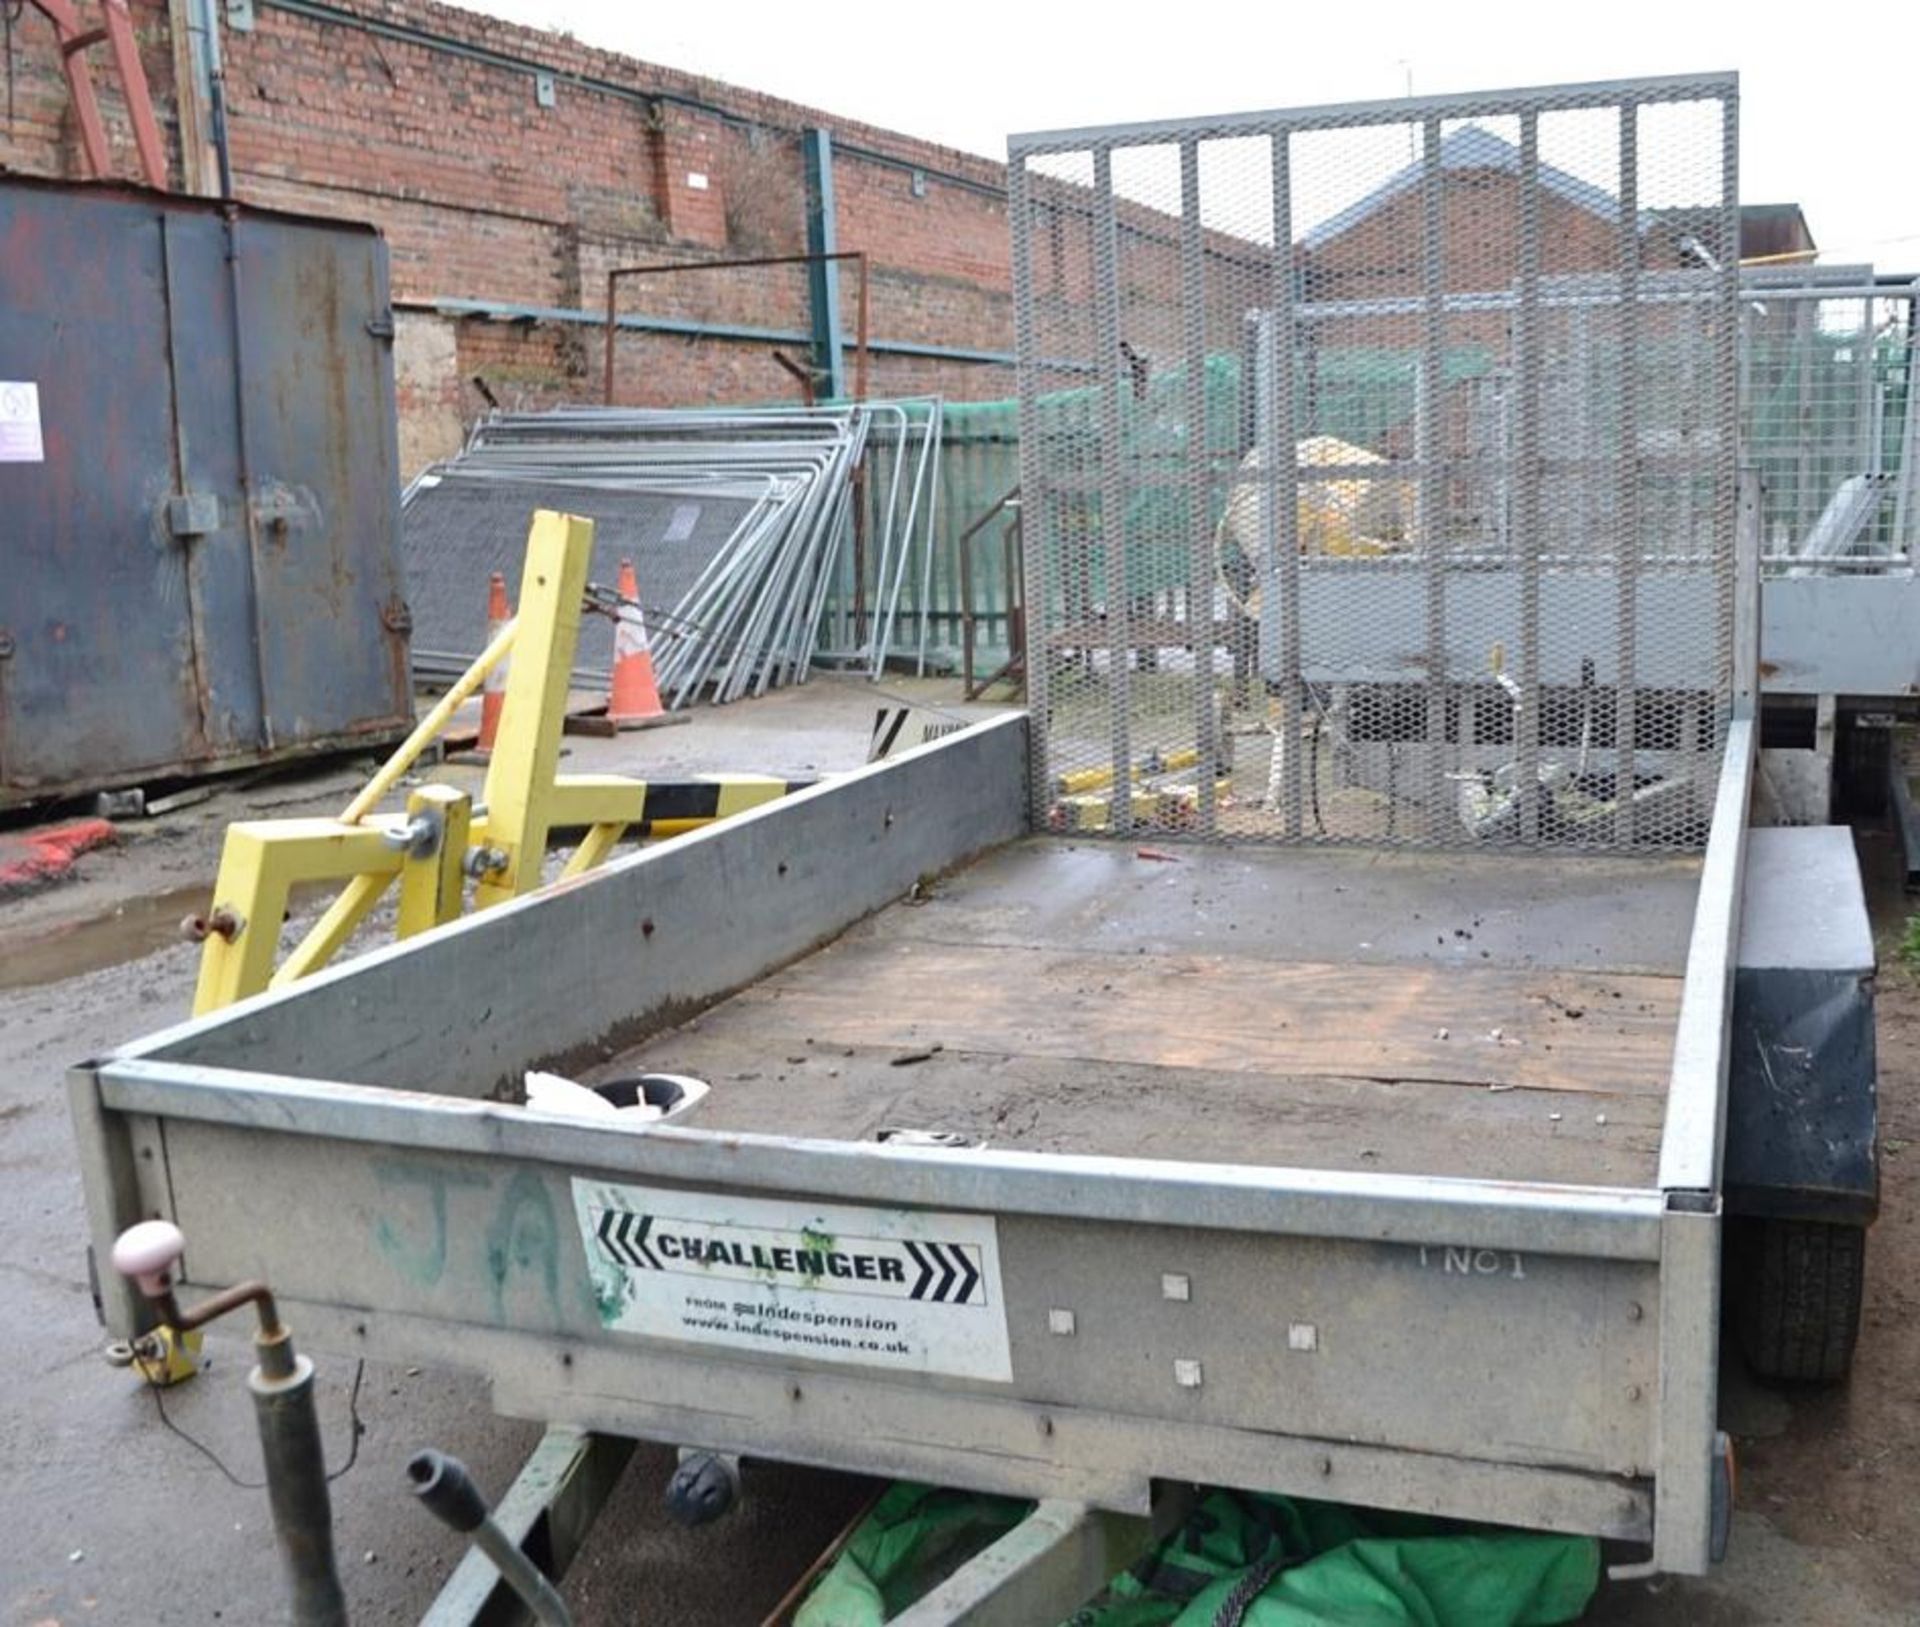 1 x Challenger Indespension 10ft Trailer With 2300Kg Gross Weight - CL464 - Location:Liverpool L19 - Image 15 of 25